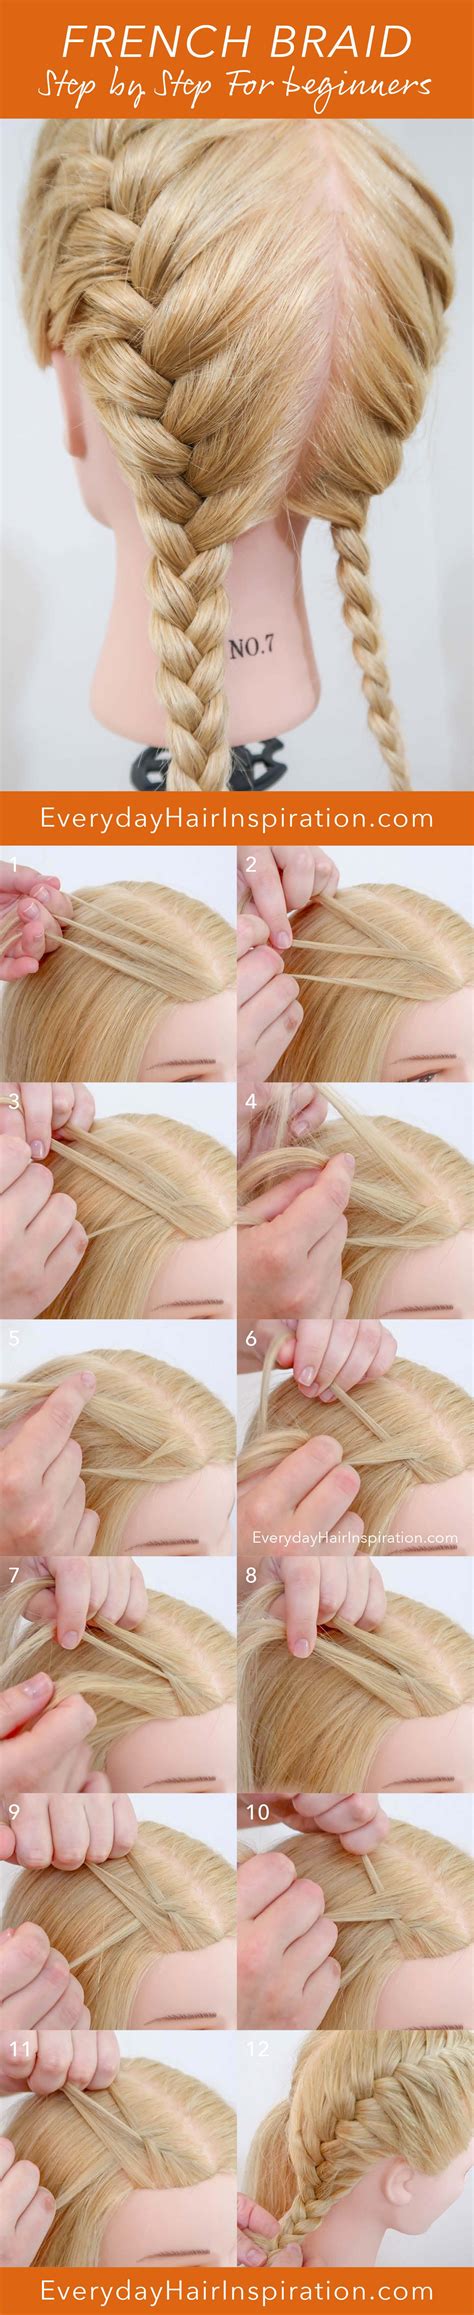 When you flip your hair back over, the braid might look a little droopy in the back, but. French Braid For Beginners - Everyday Hair inspiration - FRENCH BRAIDS